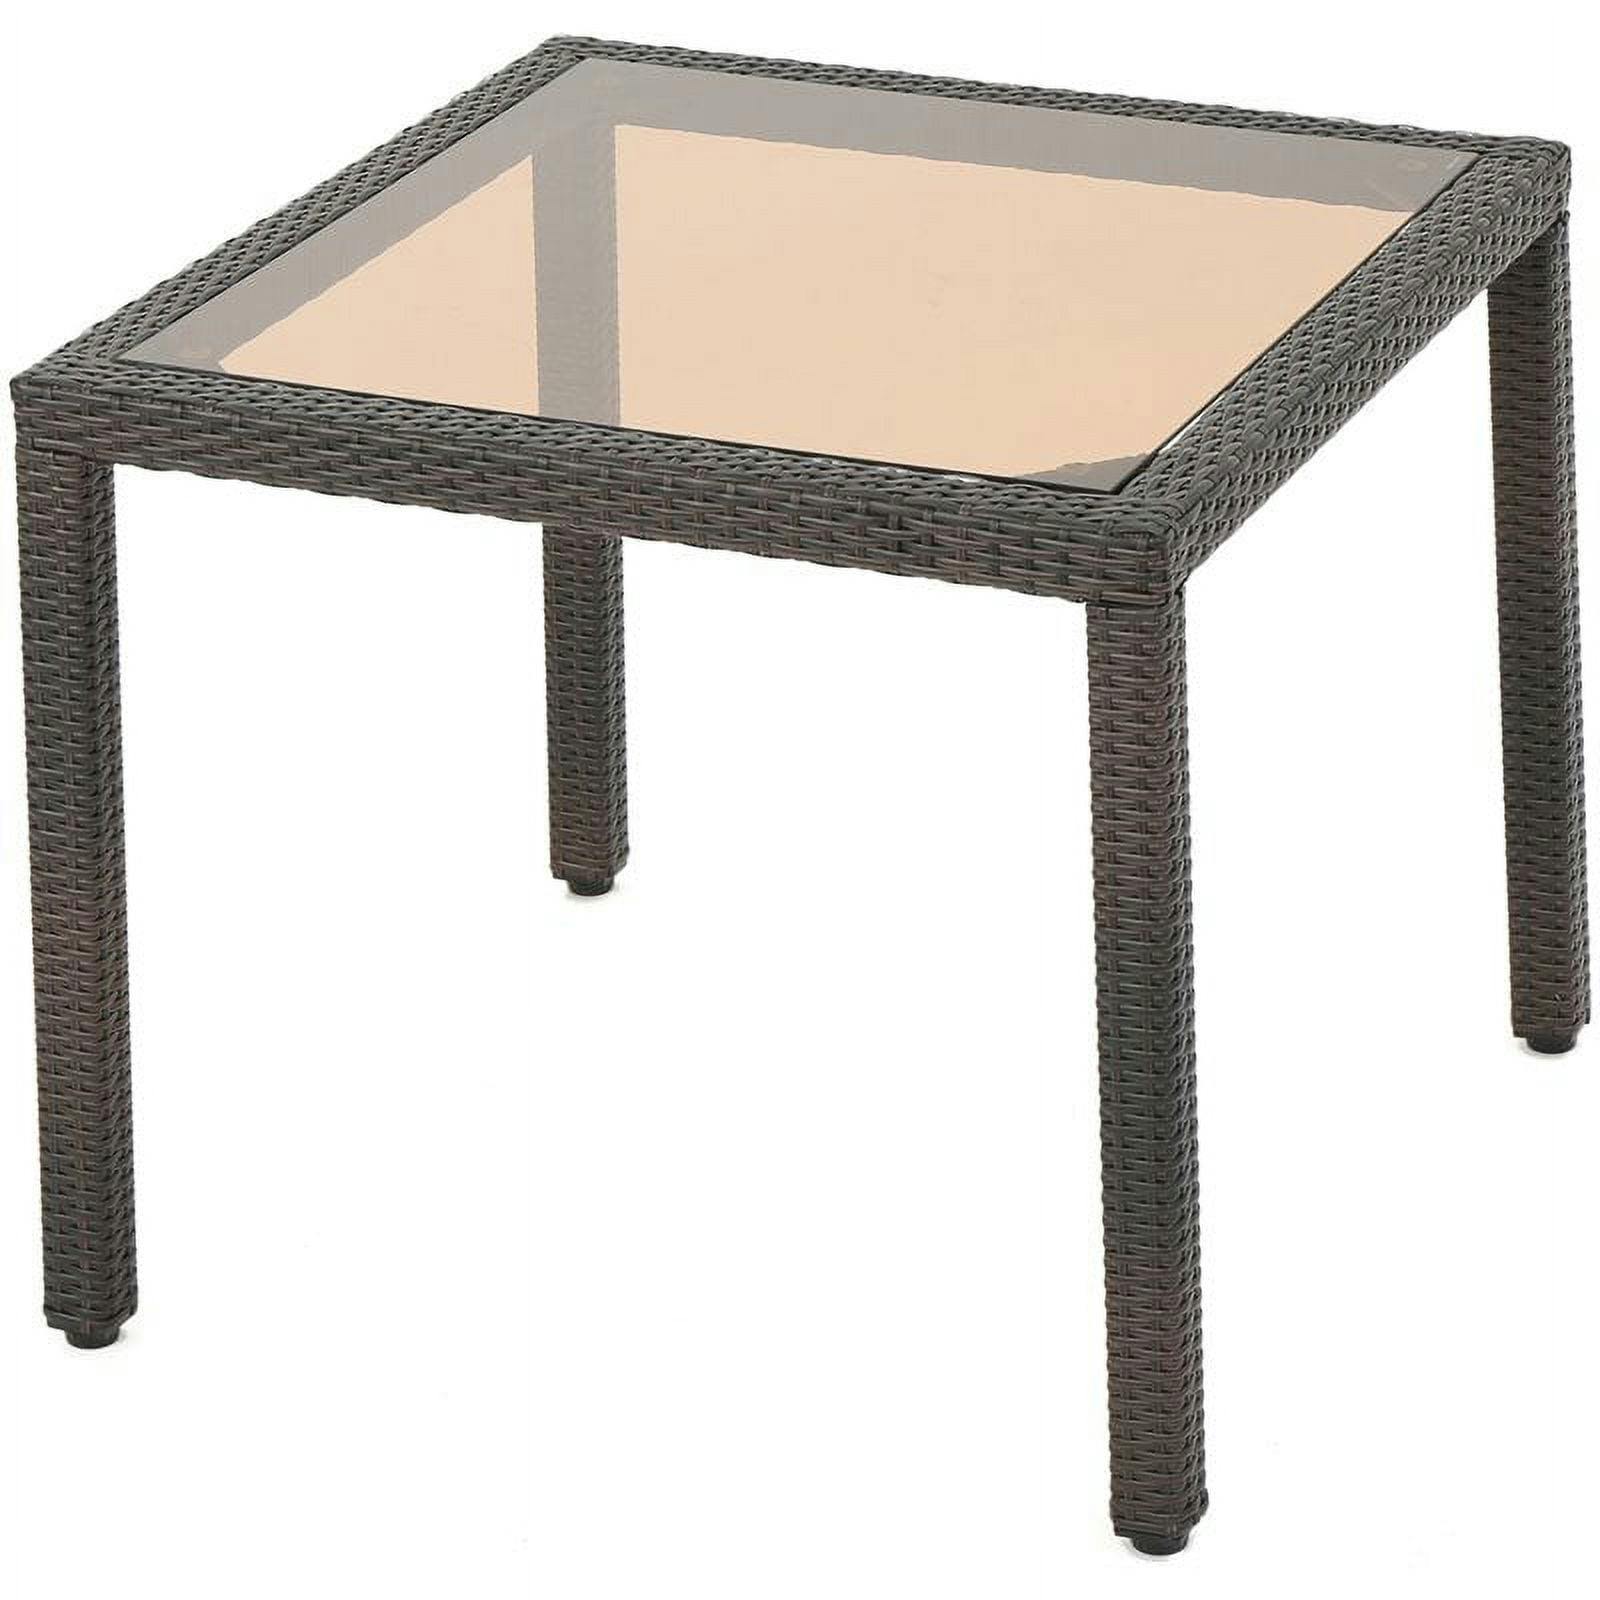 Elegant Multi Brown Wicker 34" Square Patio Dining Table with Glass Top